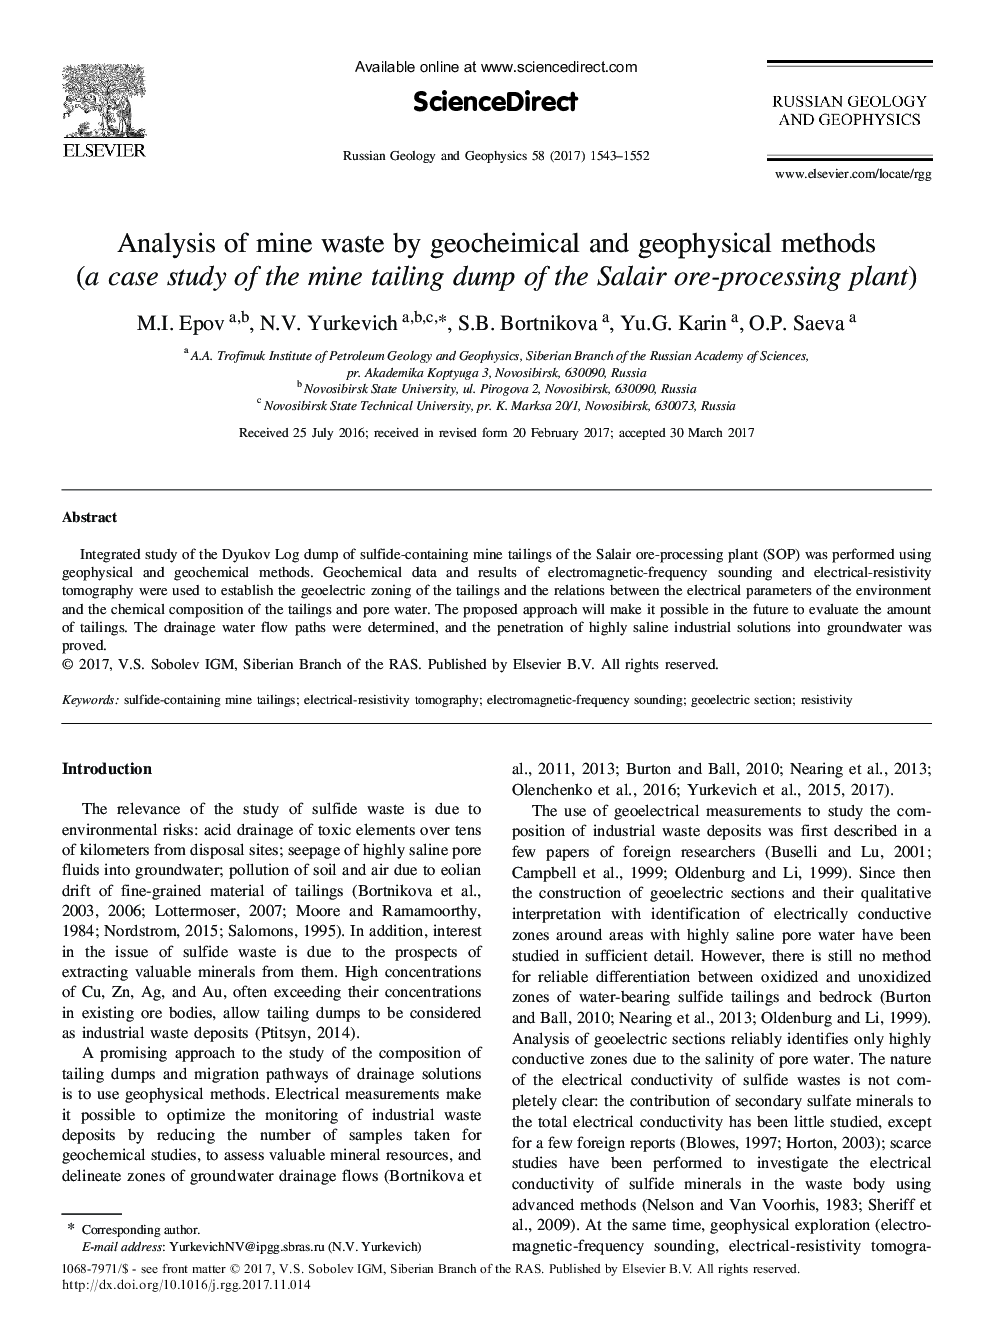 Analysis of mine waste by geocheimical and geophysical methods (a case study of the mine tailing dump of the Salair ore-processing plant)